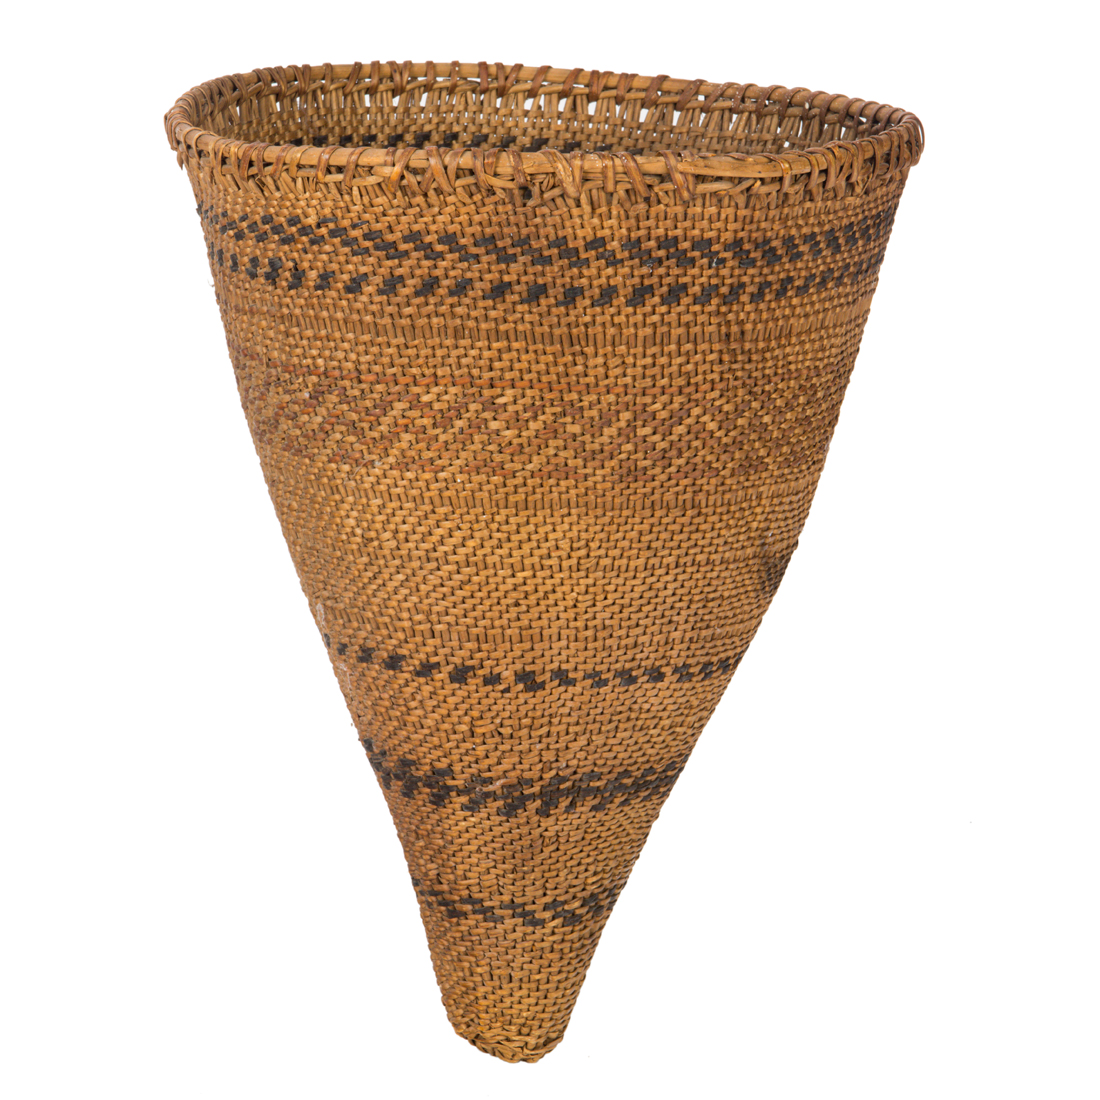 A WASHOE CONICAL COLLECTING BASKET